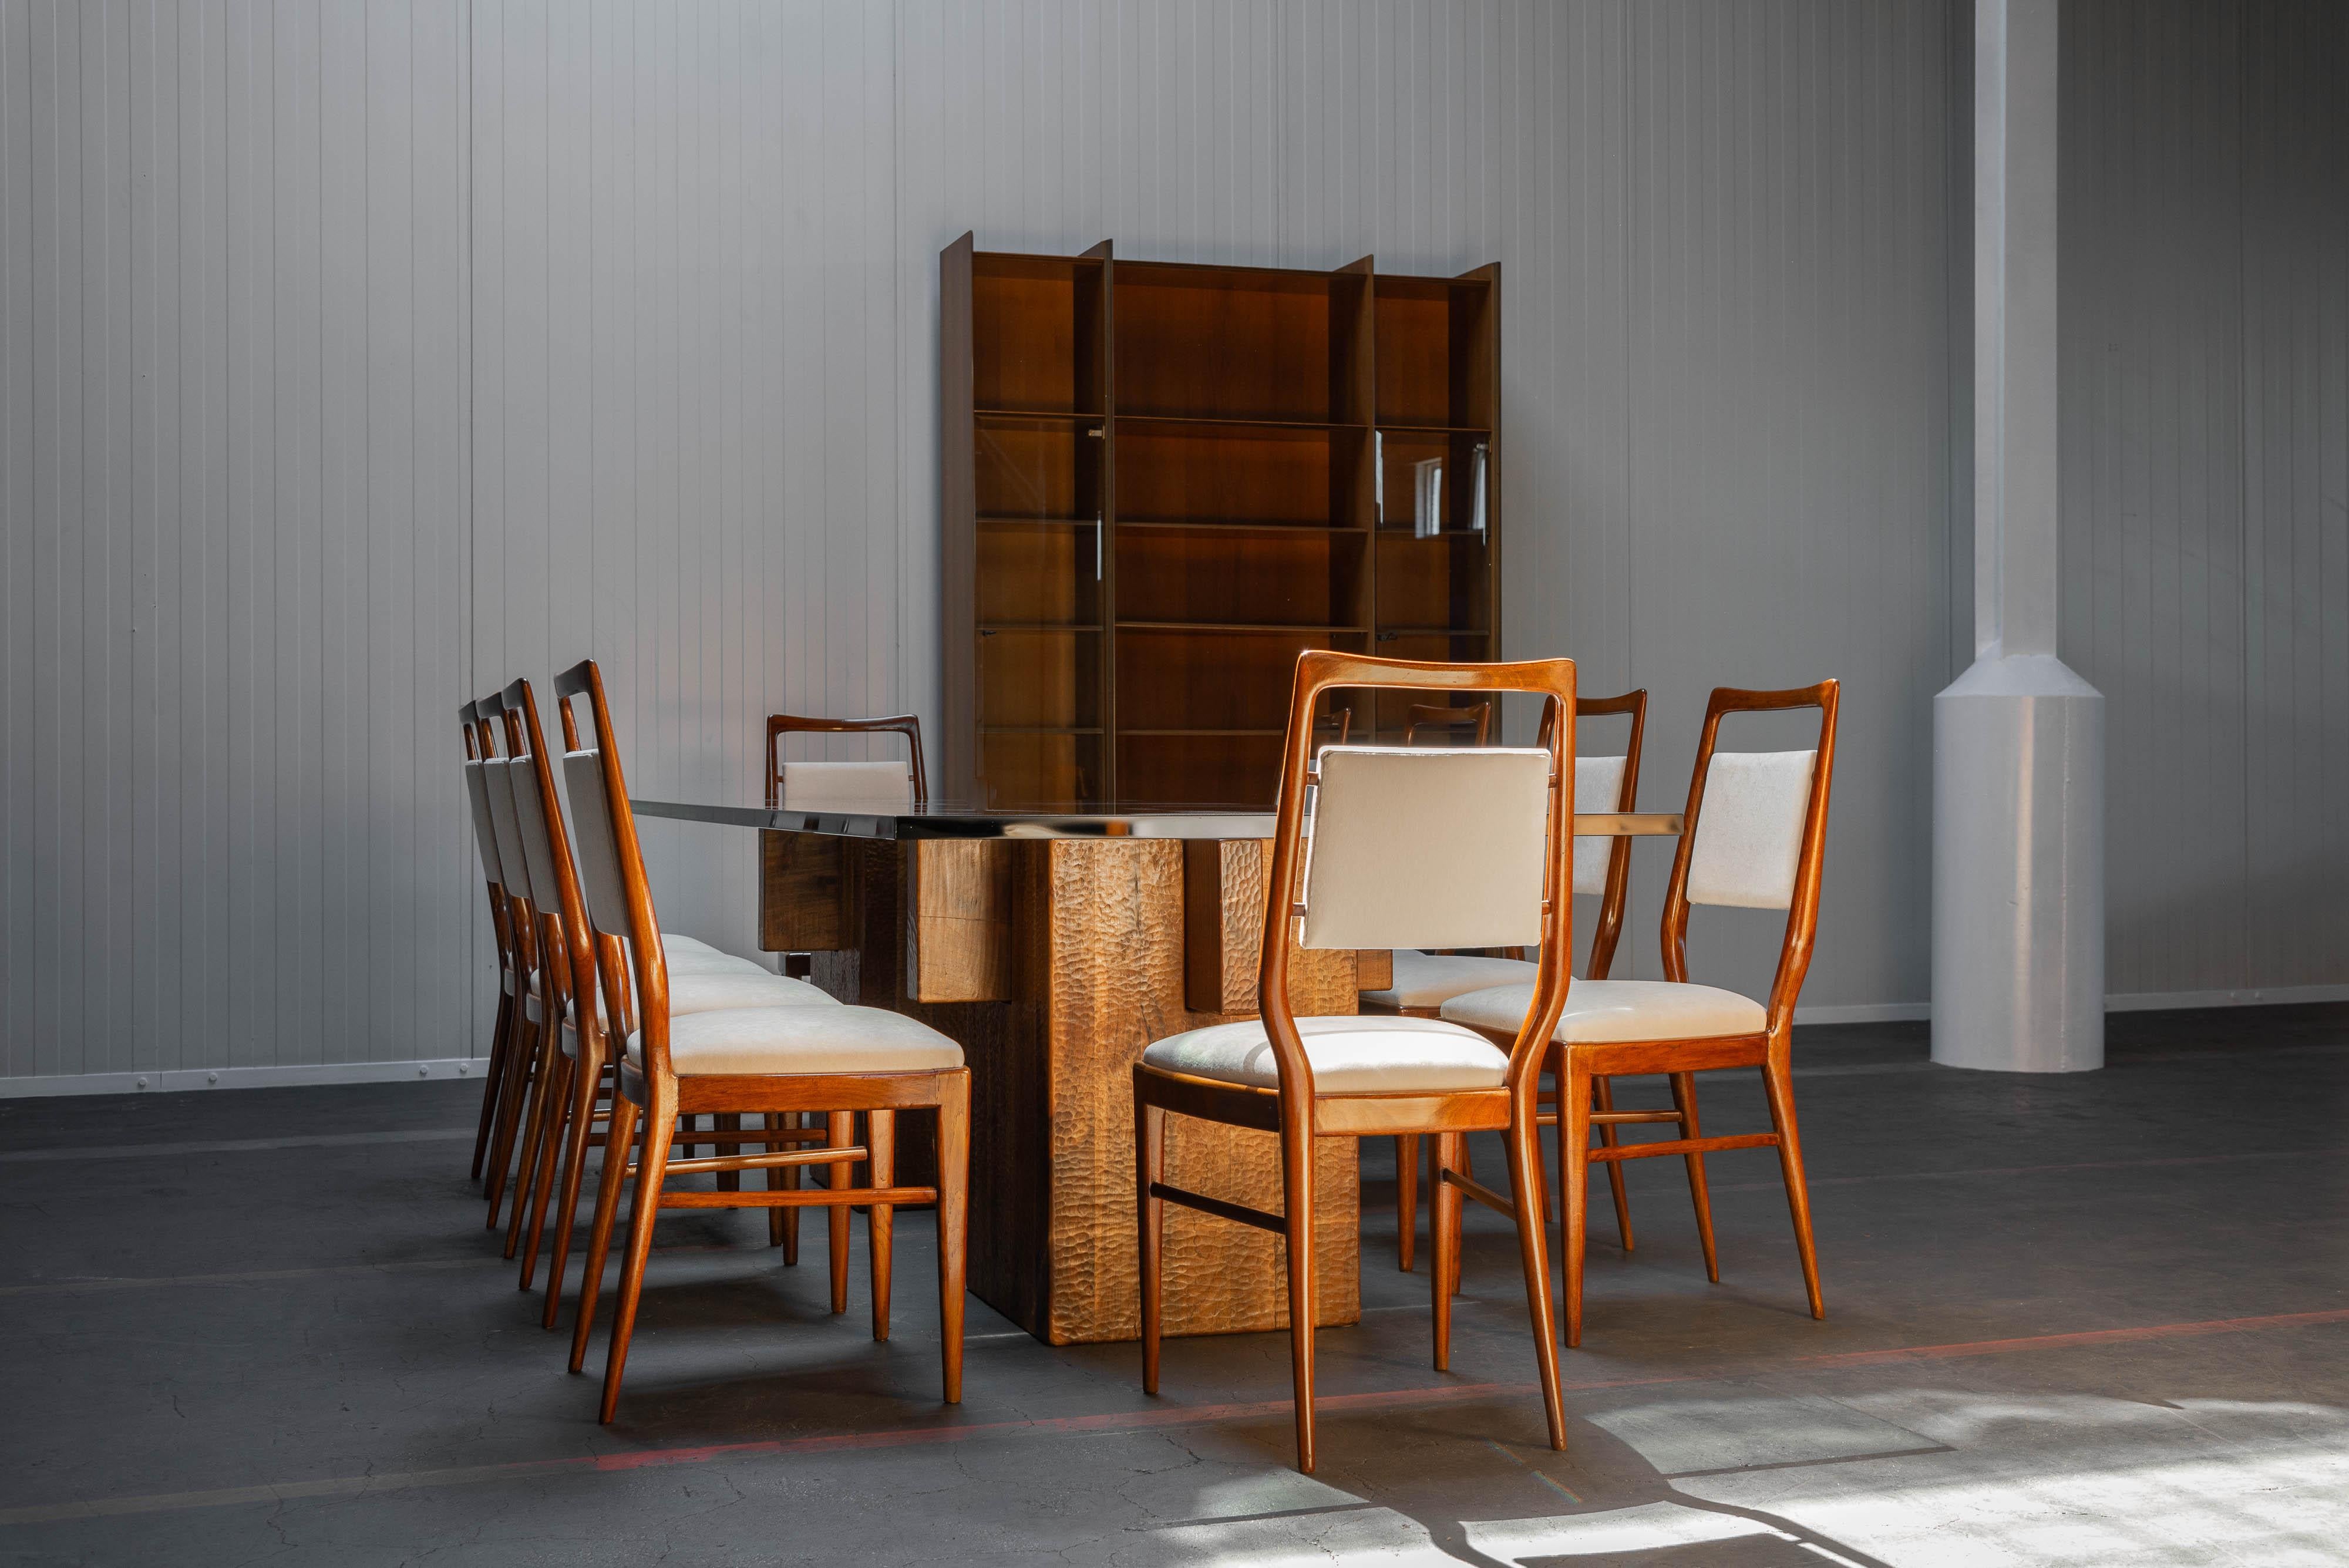 Unique Vittorio Dassi dining chairs manufactured in Italy 1950. These chairs feature beautifully shaped teak frames and the seats have been re-upholstered in a soft cream velvet fabric. The standout feature of these chairs is their unique design,